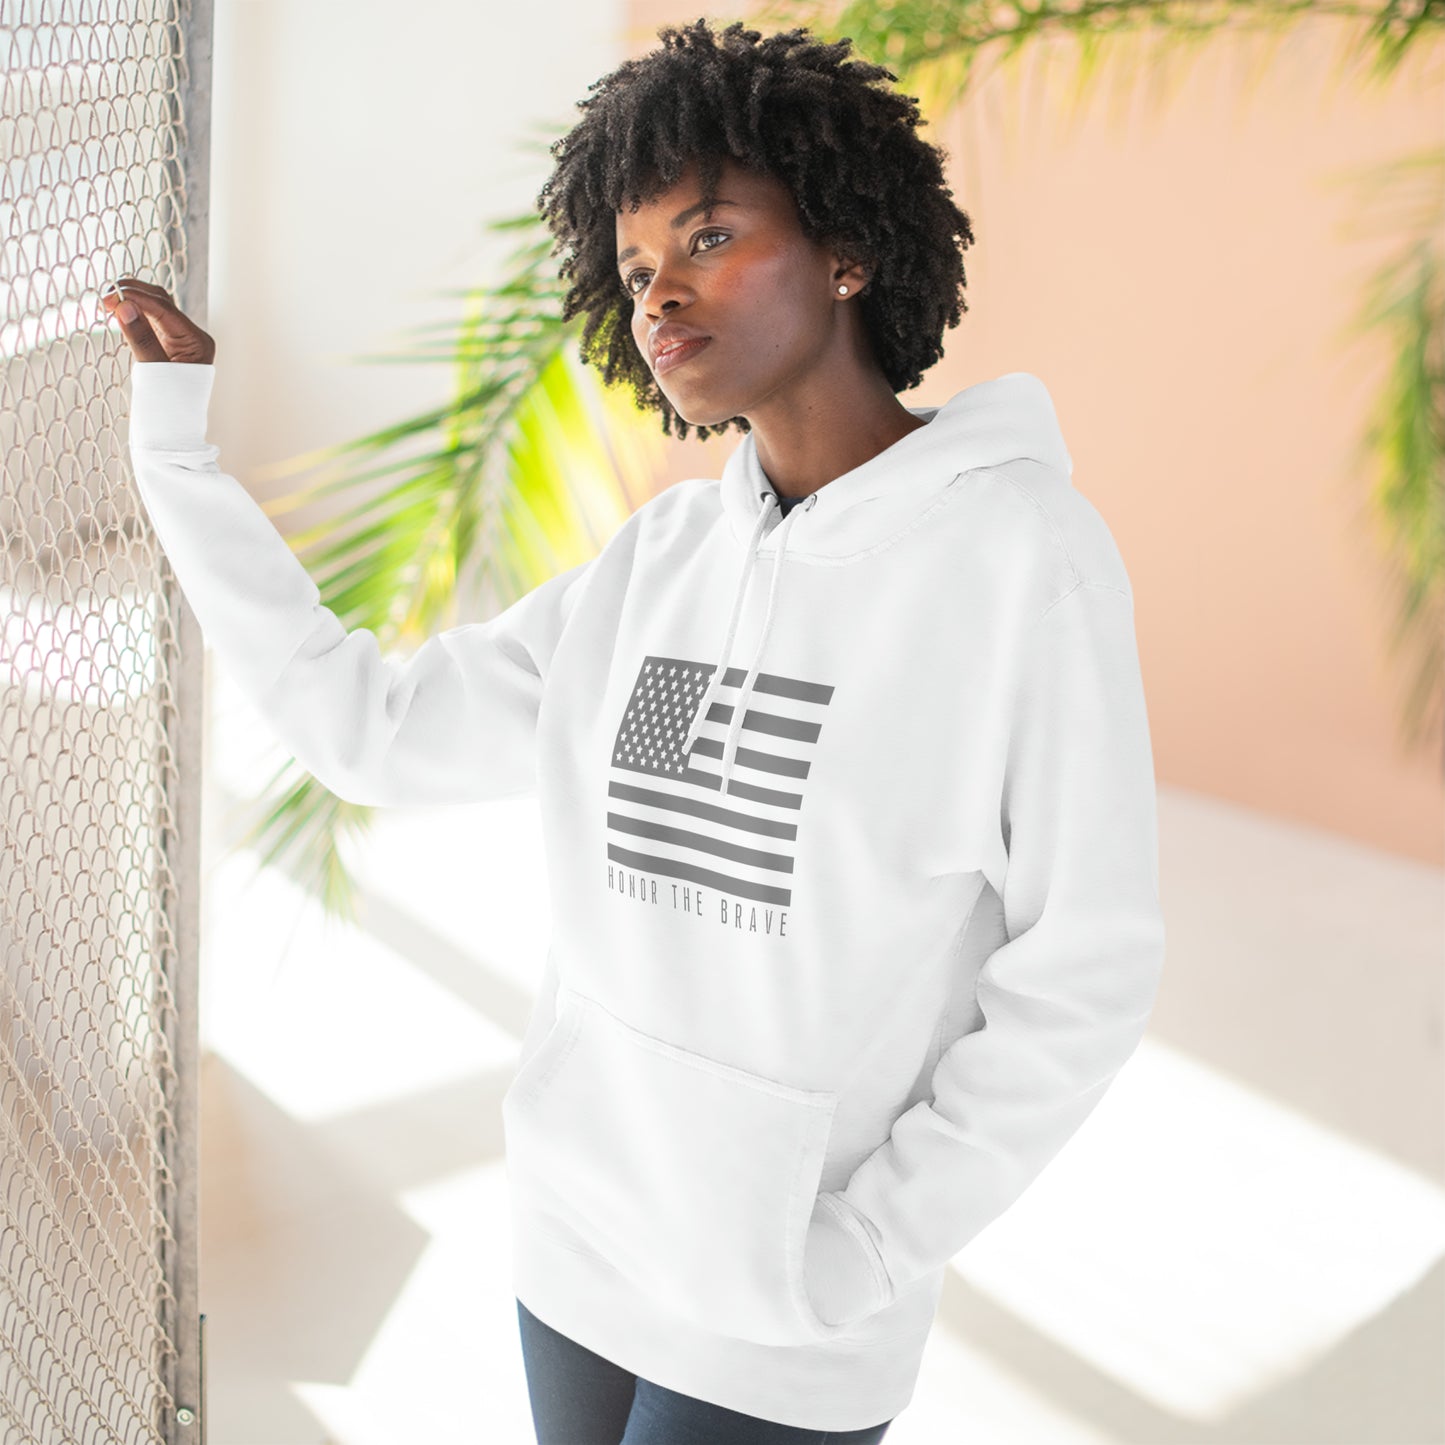 Honor The Brave -Grey/Black Out Flag- Premium Pullover Hoodie